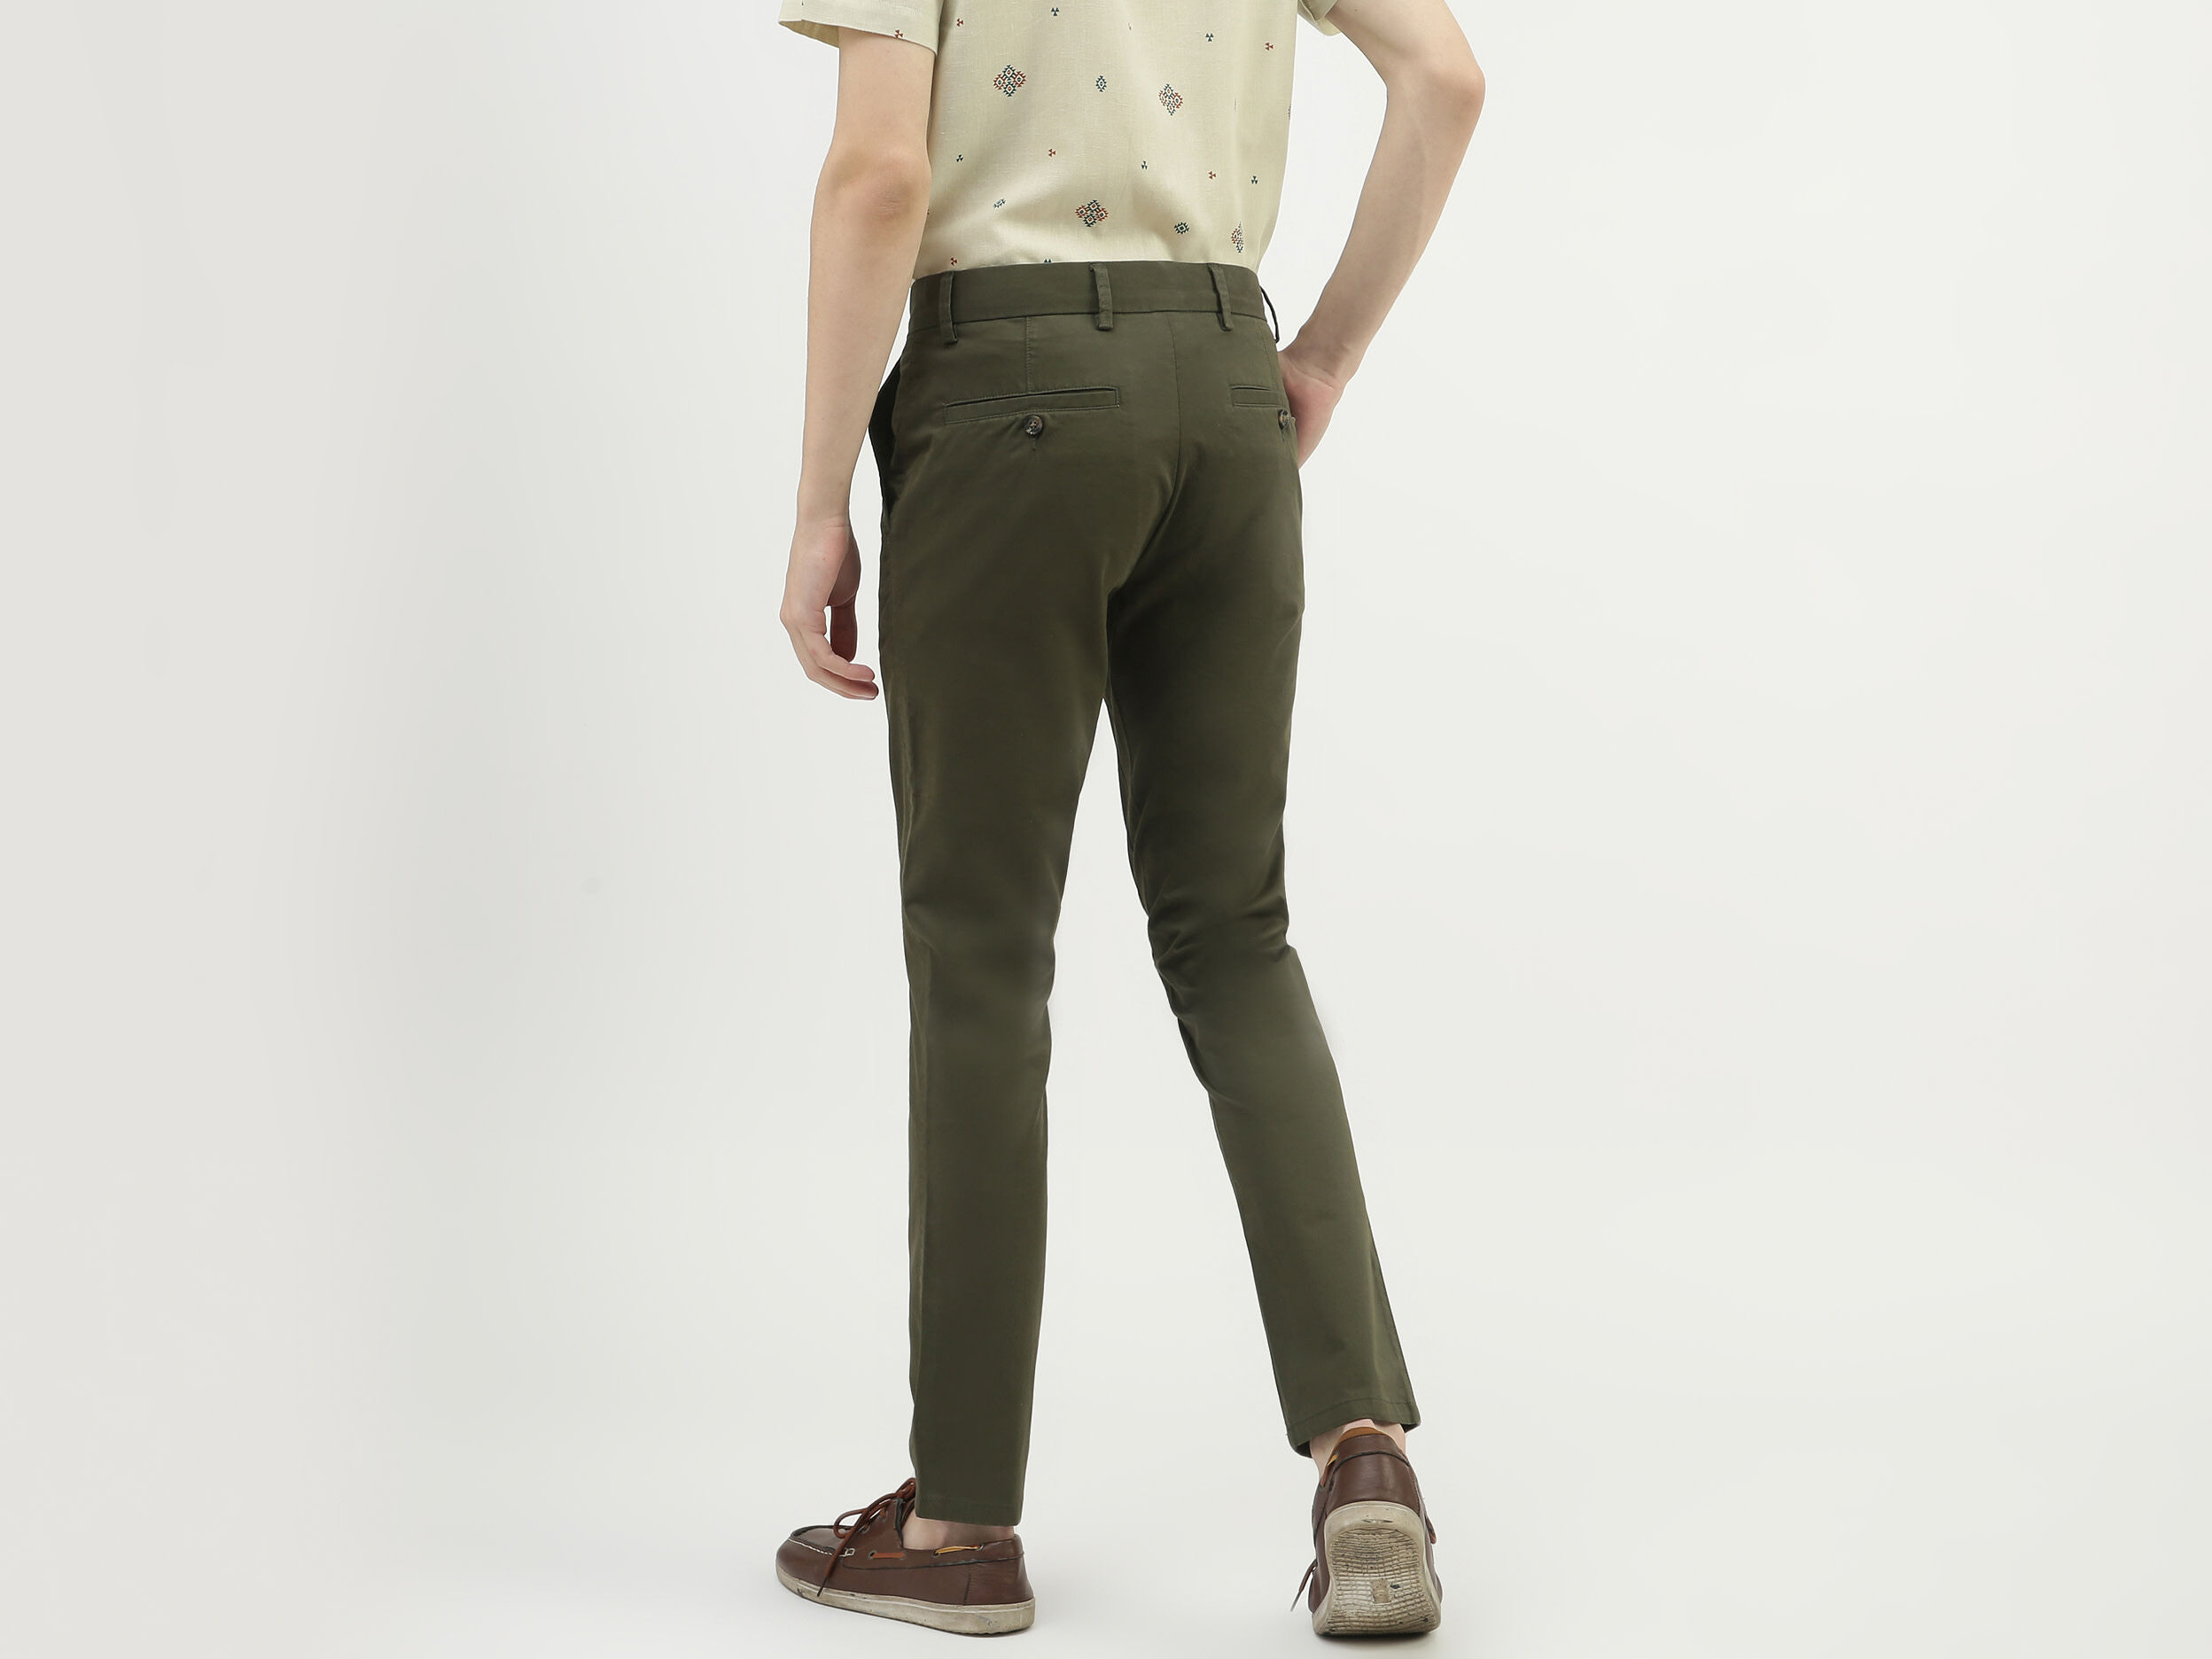 BASICS Casual Trousers  Buy BASICS Tapered Fit Ebony Green Satin Stretch  Trouser Online  Nykaa Fashion